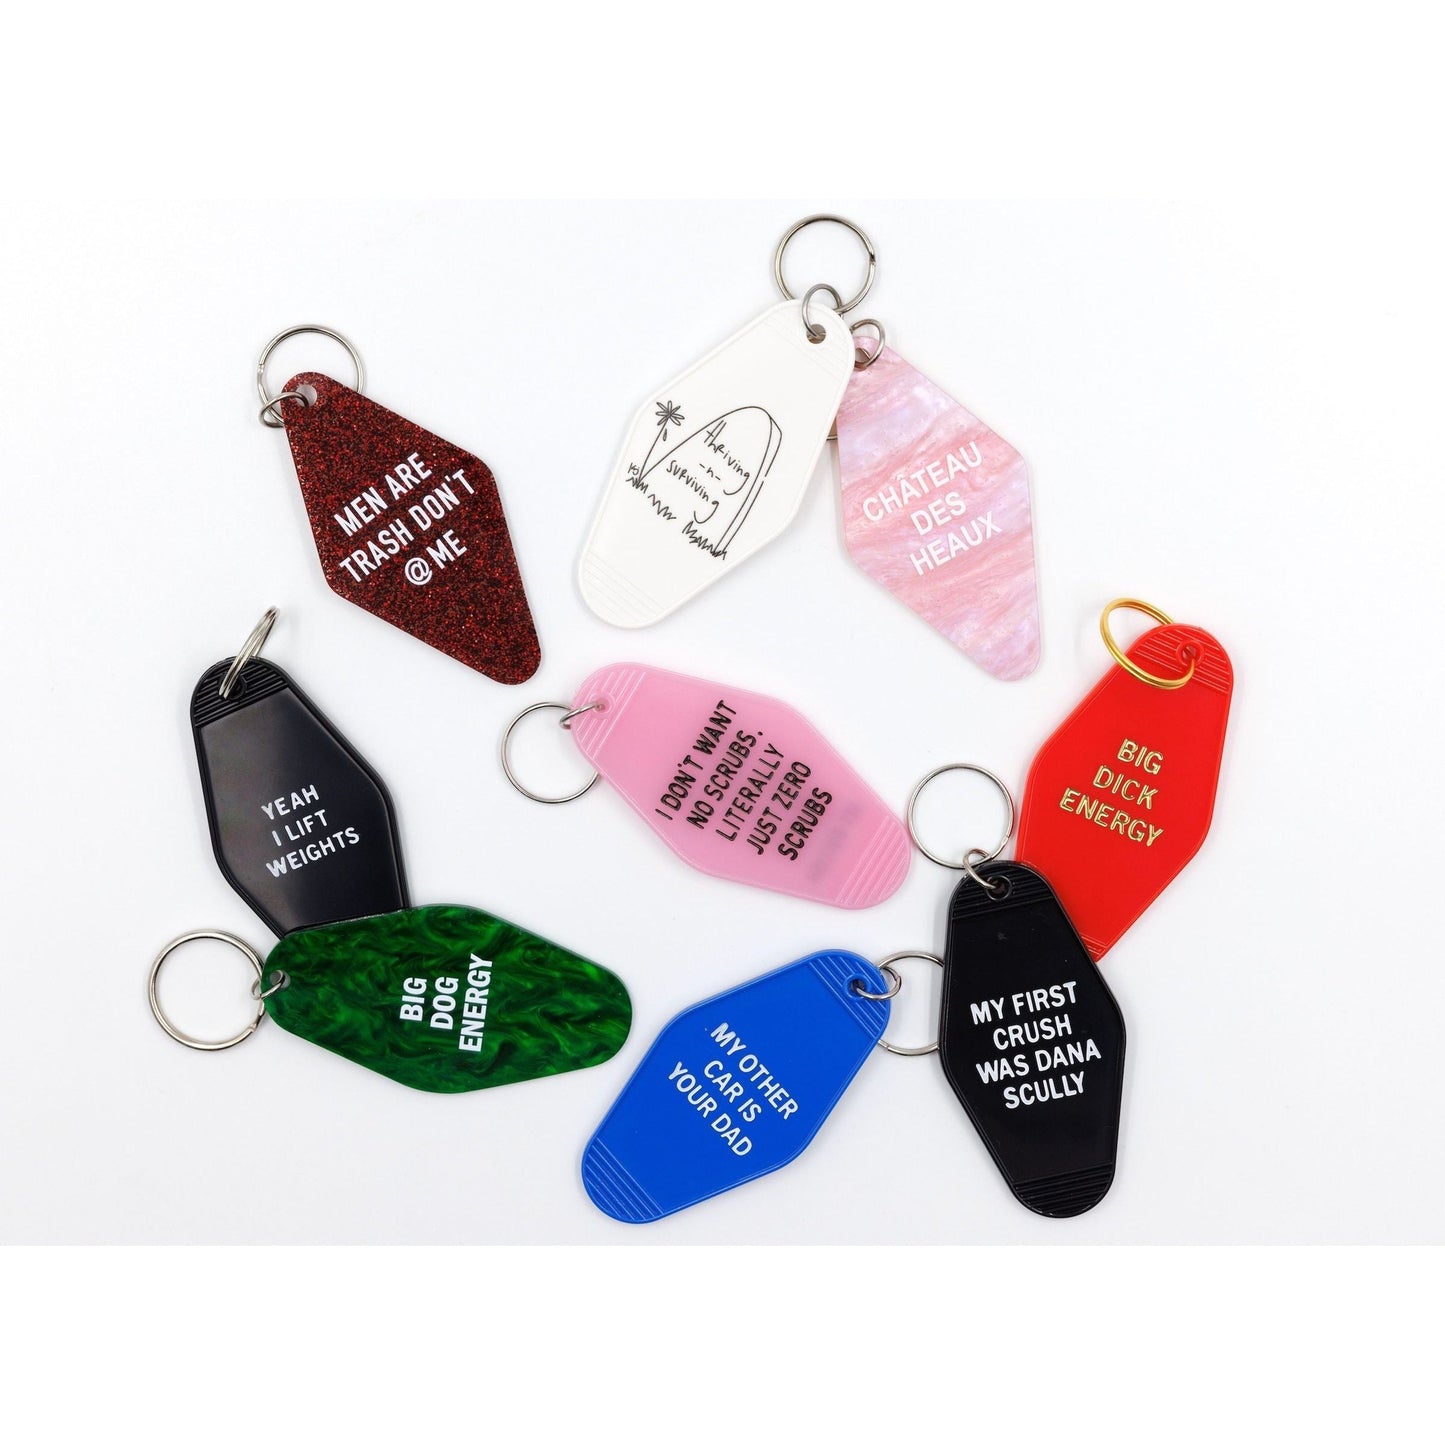 Big Dick Energy Motel Style Keychain in Red